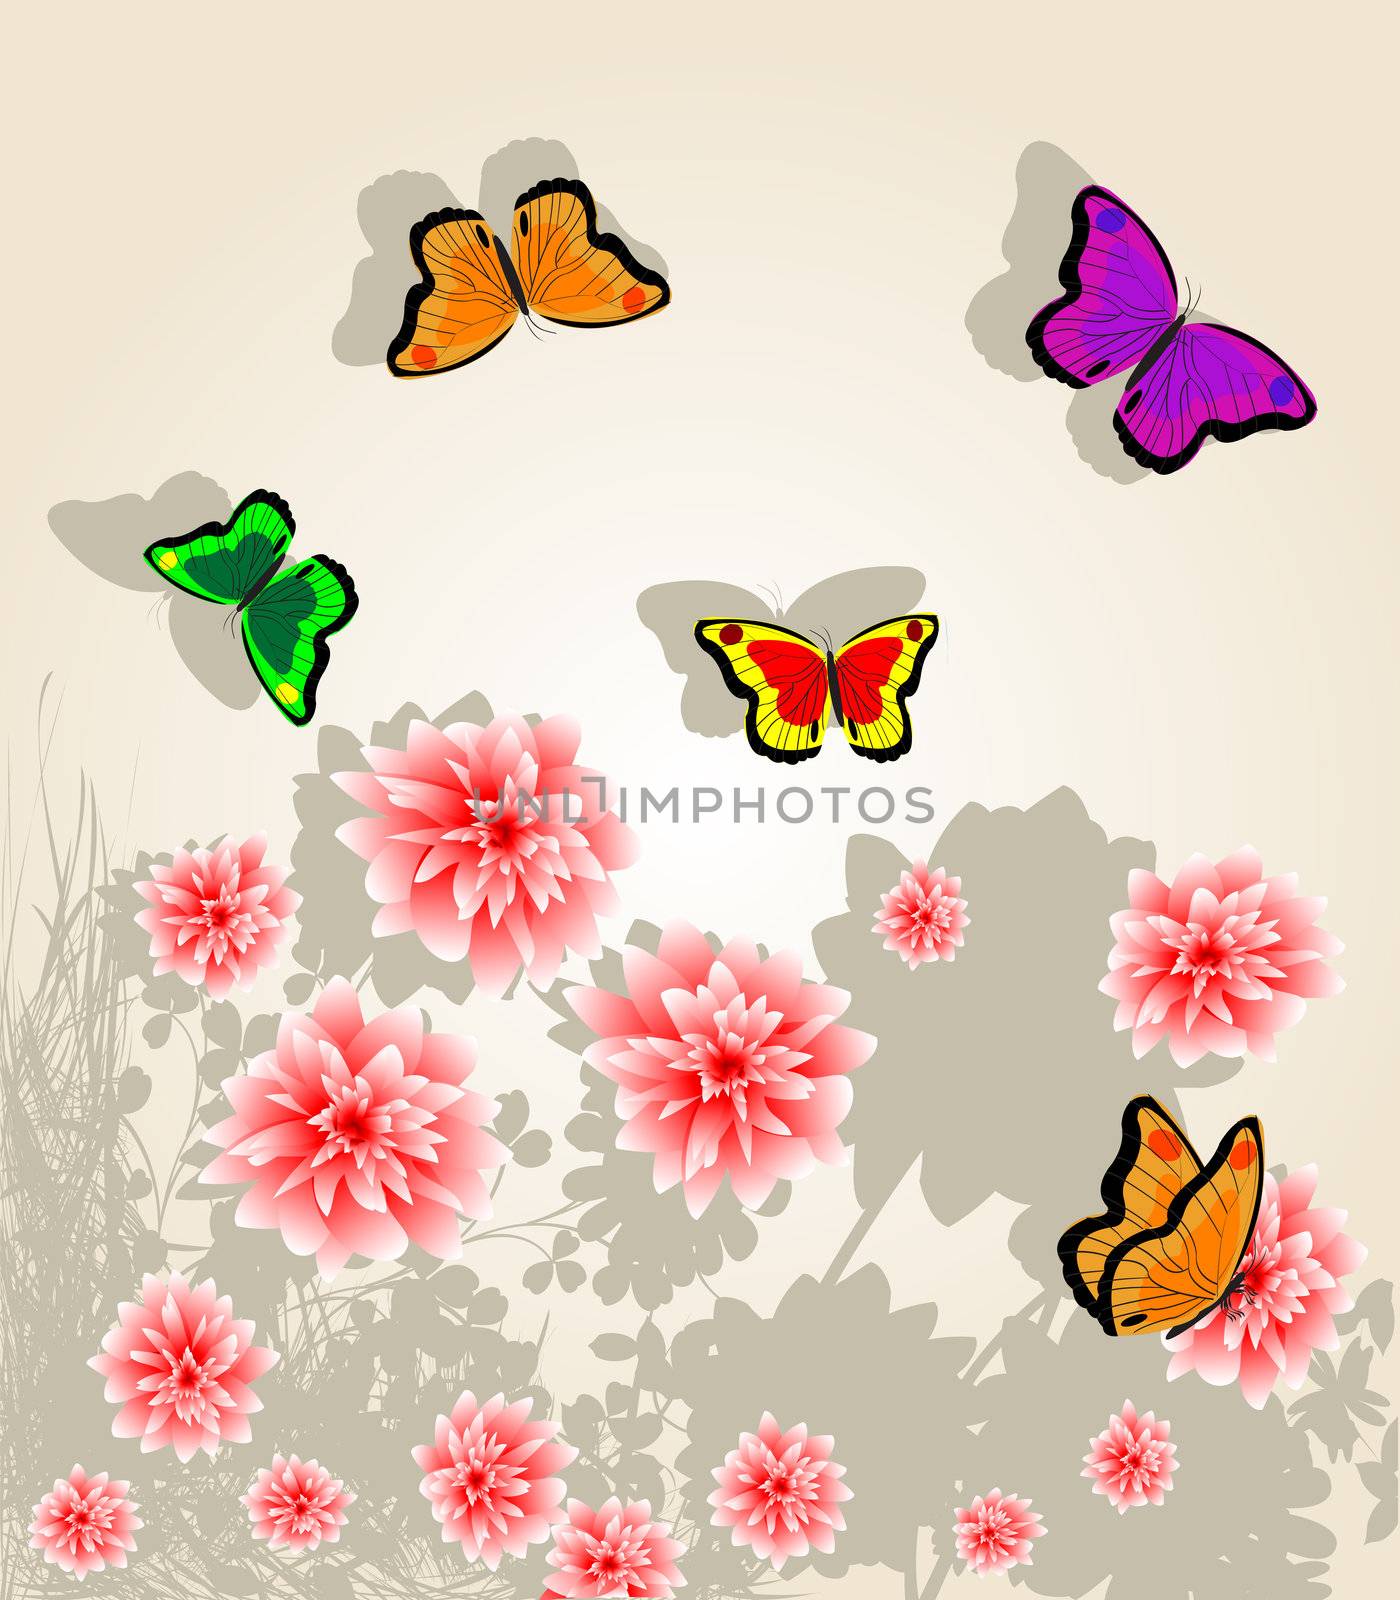 Flower and butterfly illustration, abstract art